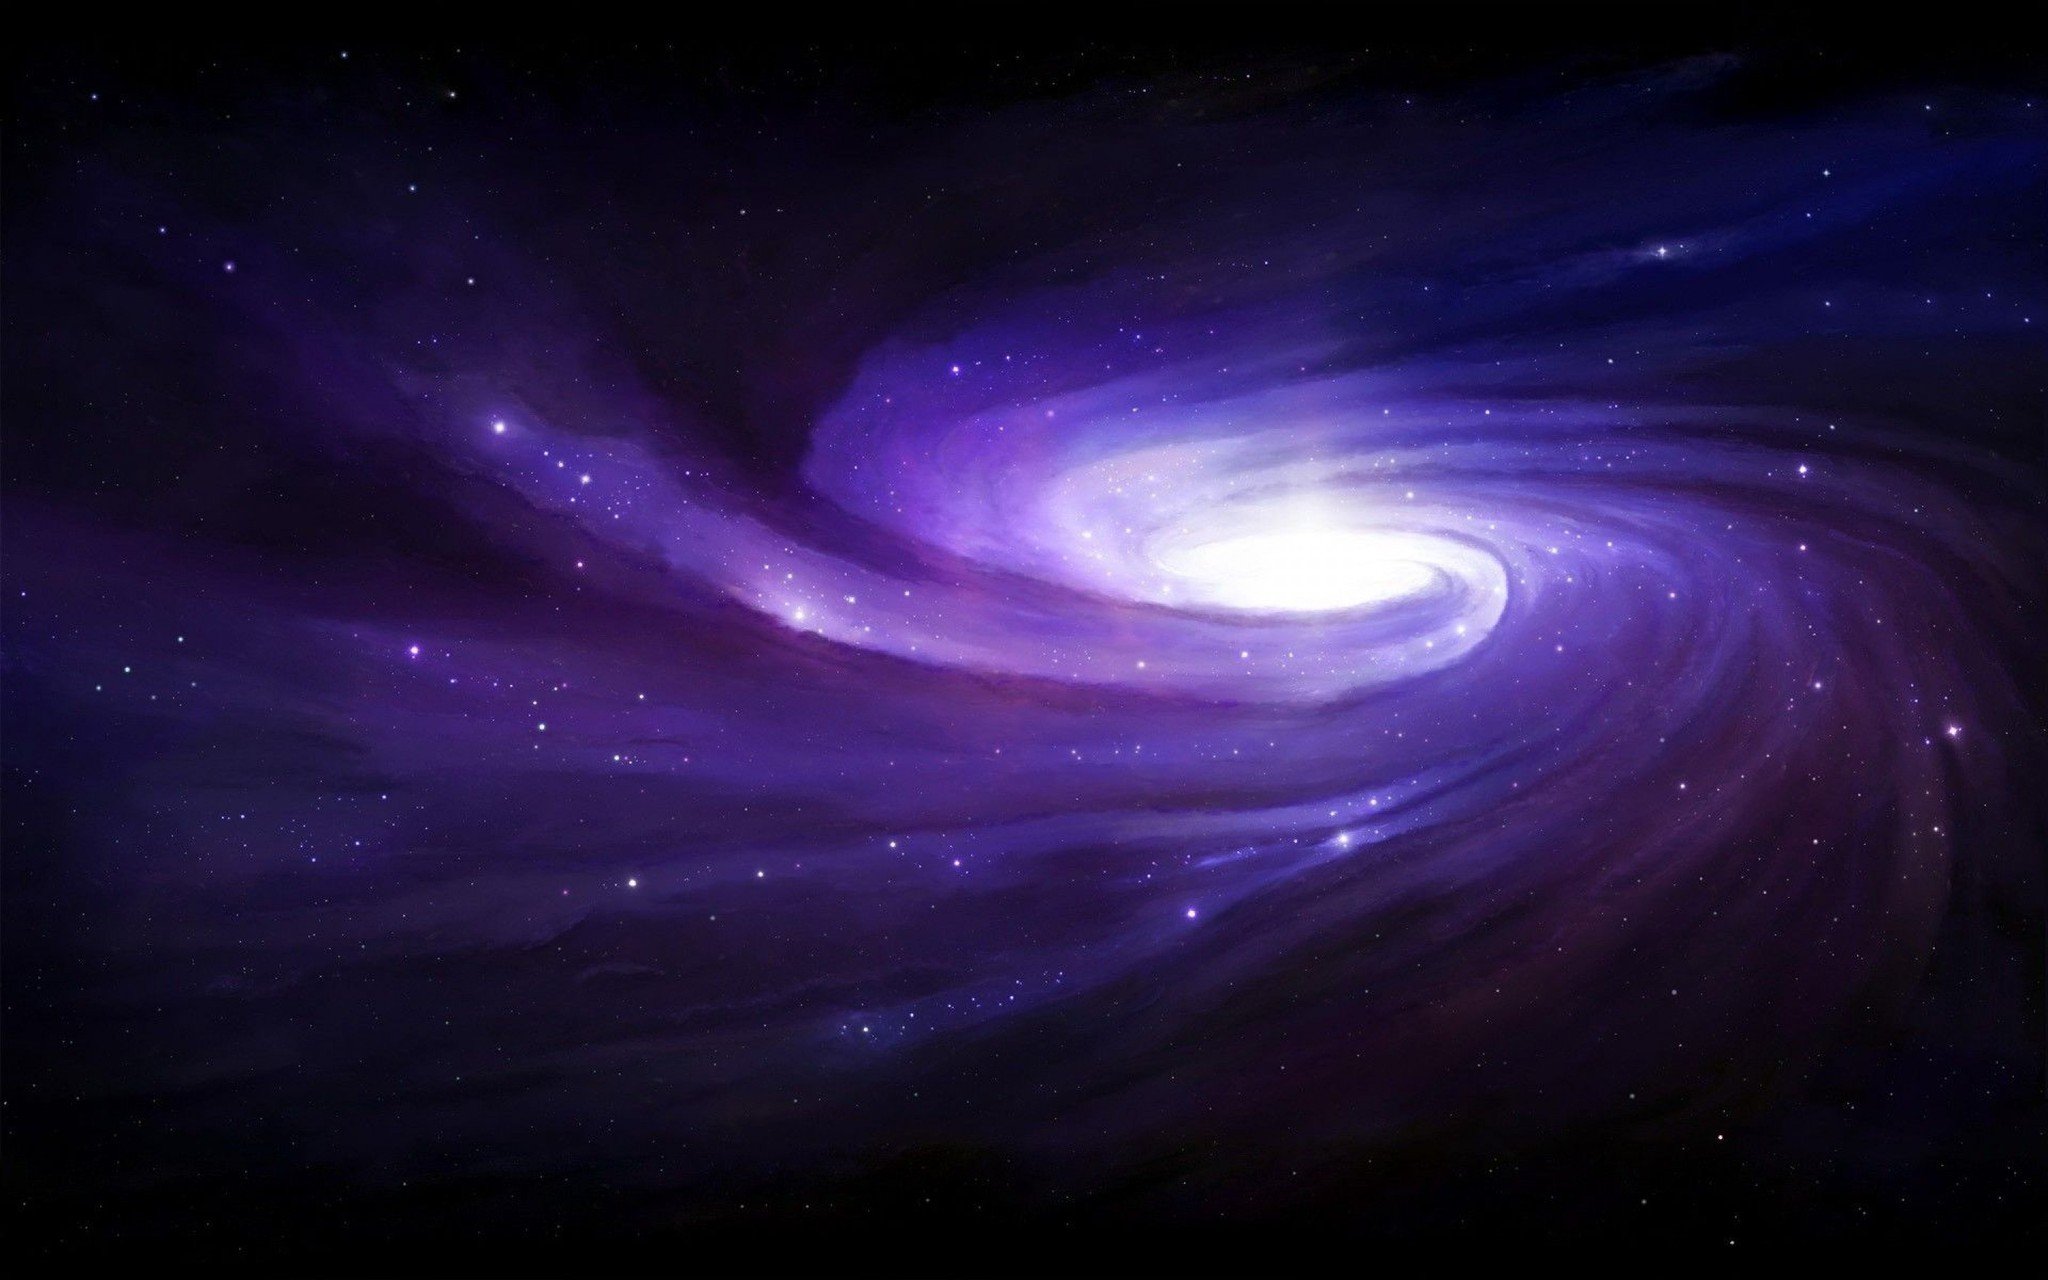 How much life could this galaxy sustain?